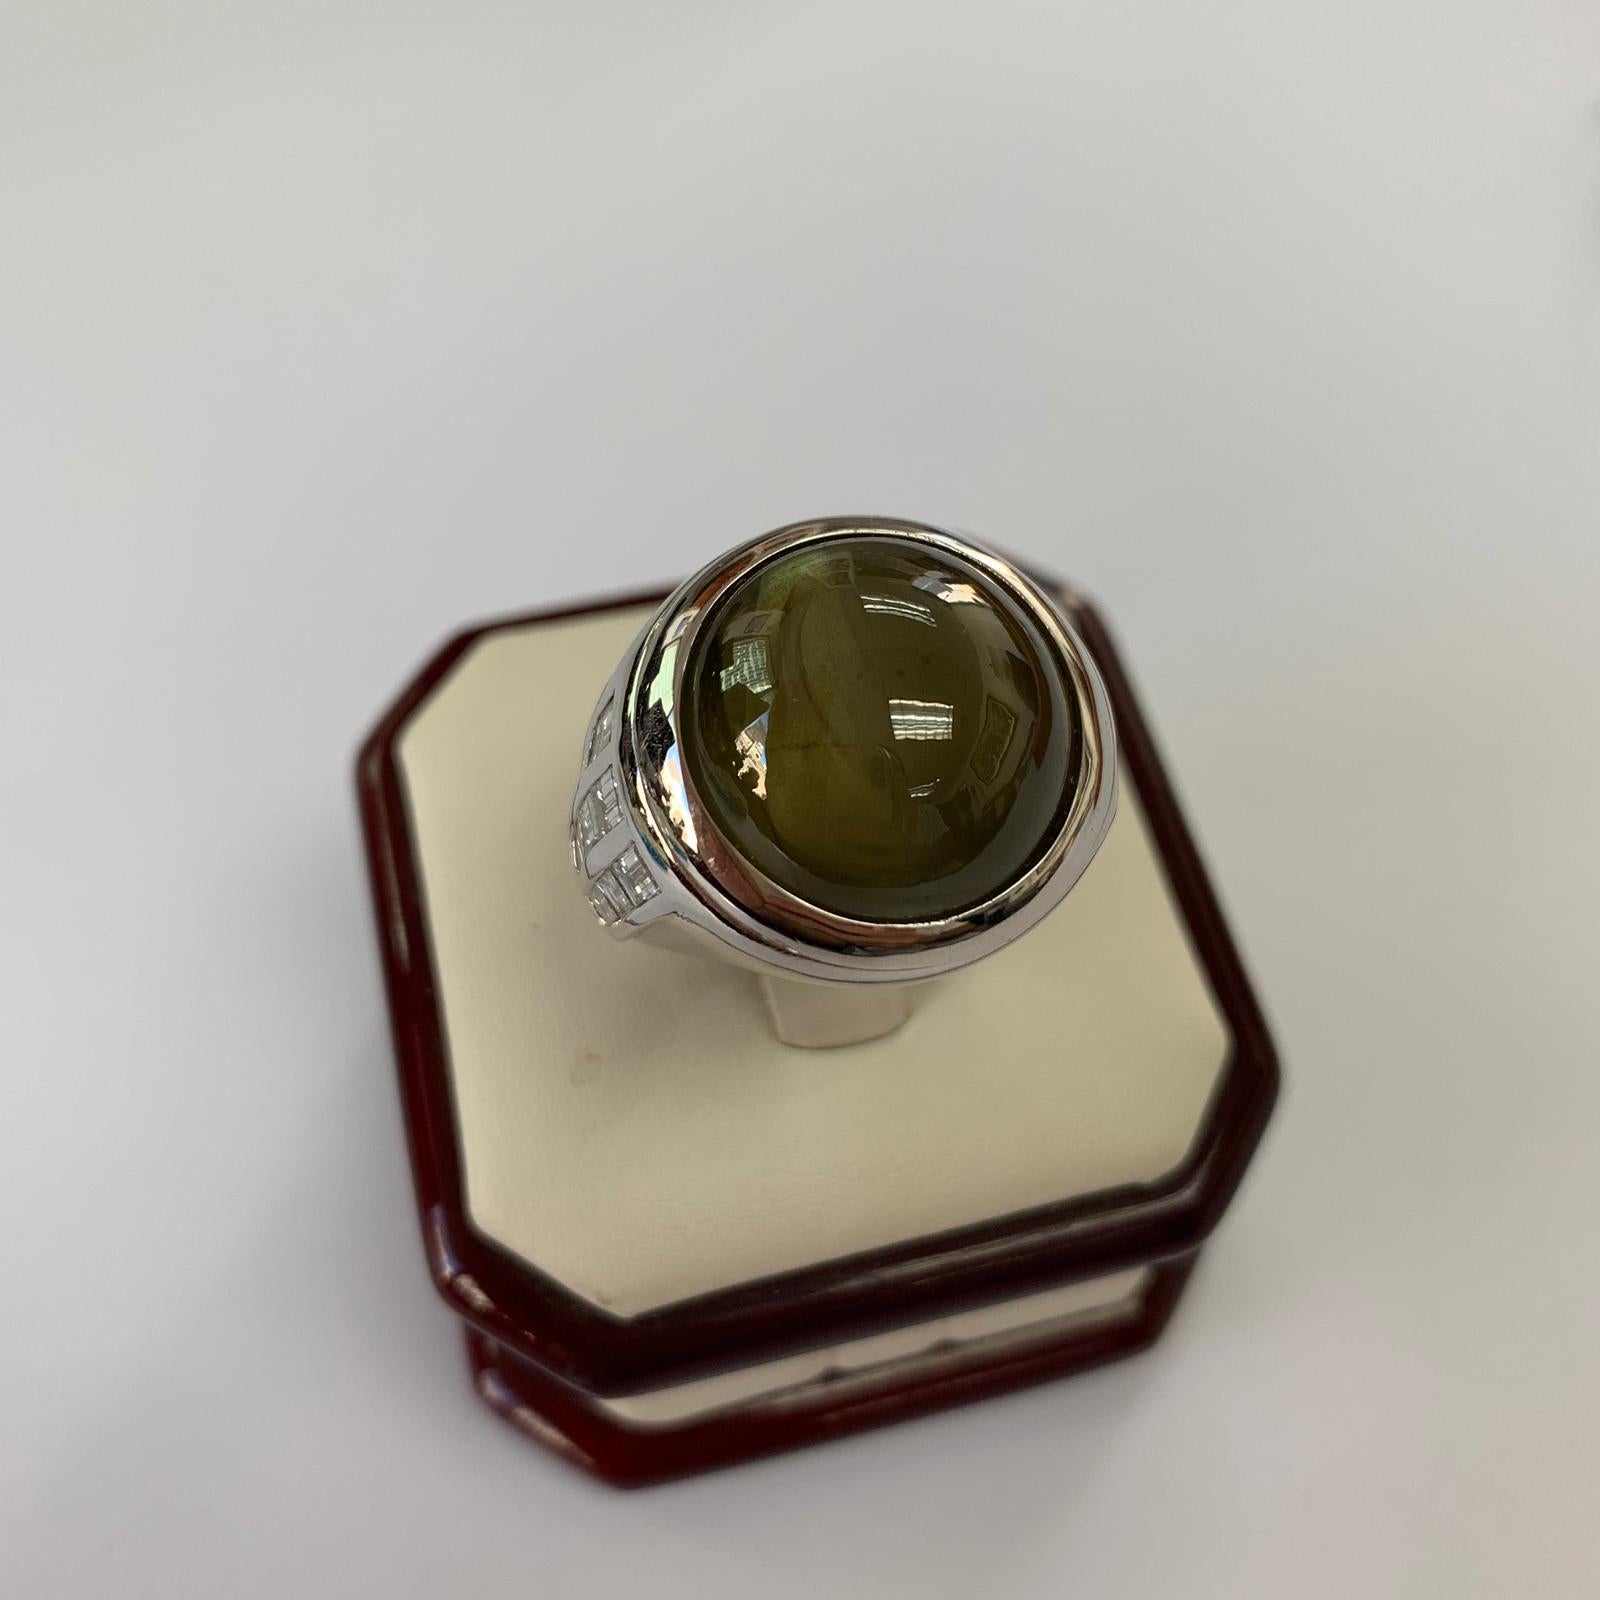 Natural Cat's eye Chrysoberyl gemstone certified by EGL USA. Top Gem Cats Eye with Cocktail Ring 18k white gold, total weight 48.85 carats. Side diamond total weight 1.43cttw. Total gram weight of the ring is 35.34 grams.